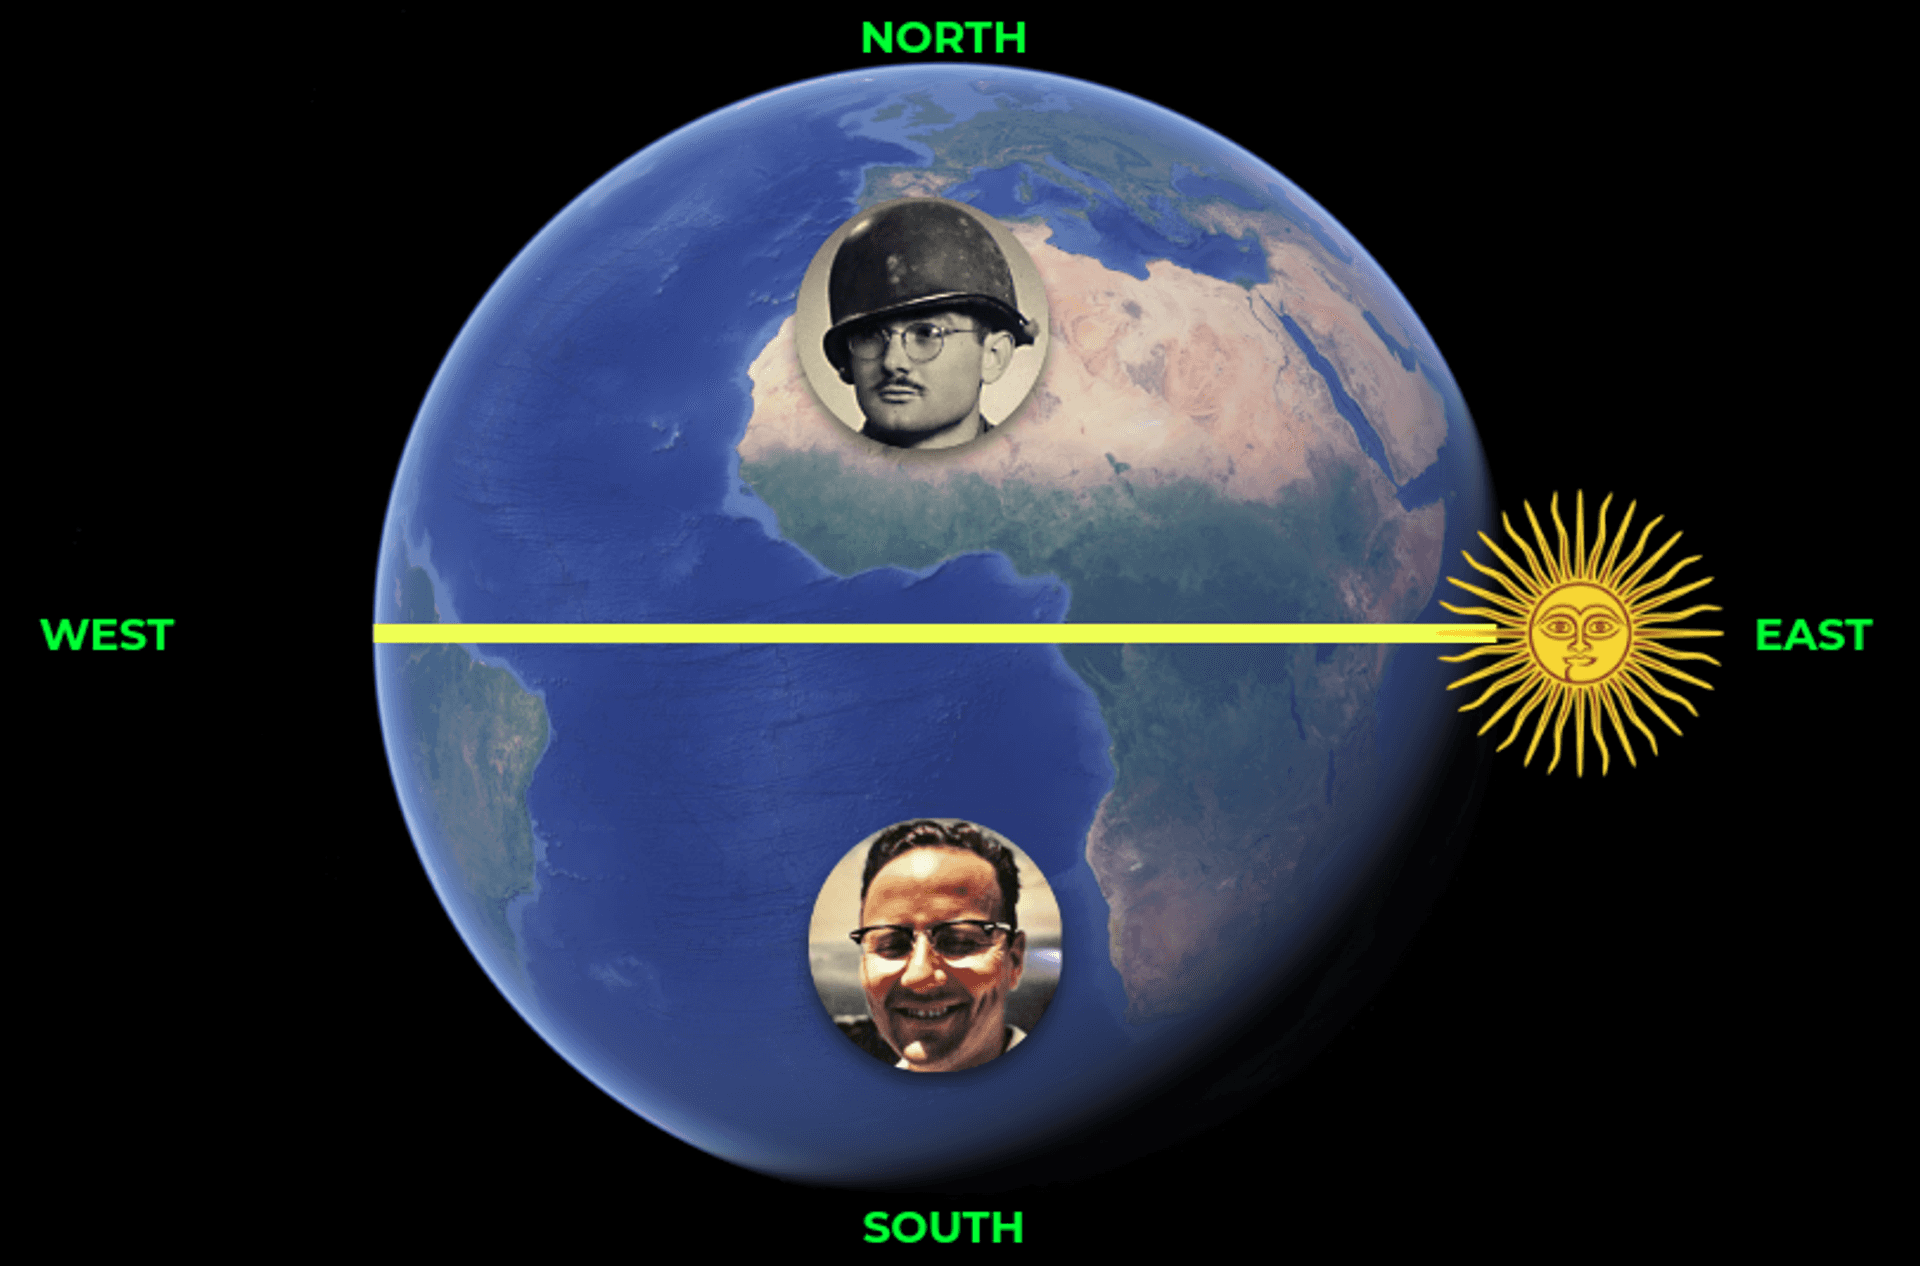 Two persons standing on Earth, one in the North, another in the South, and Sun rising at East